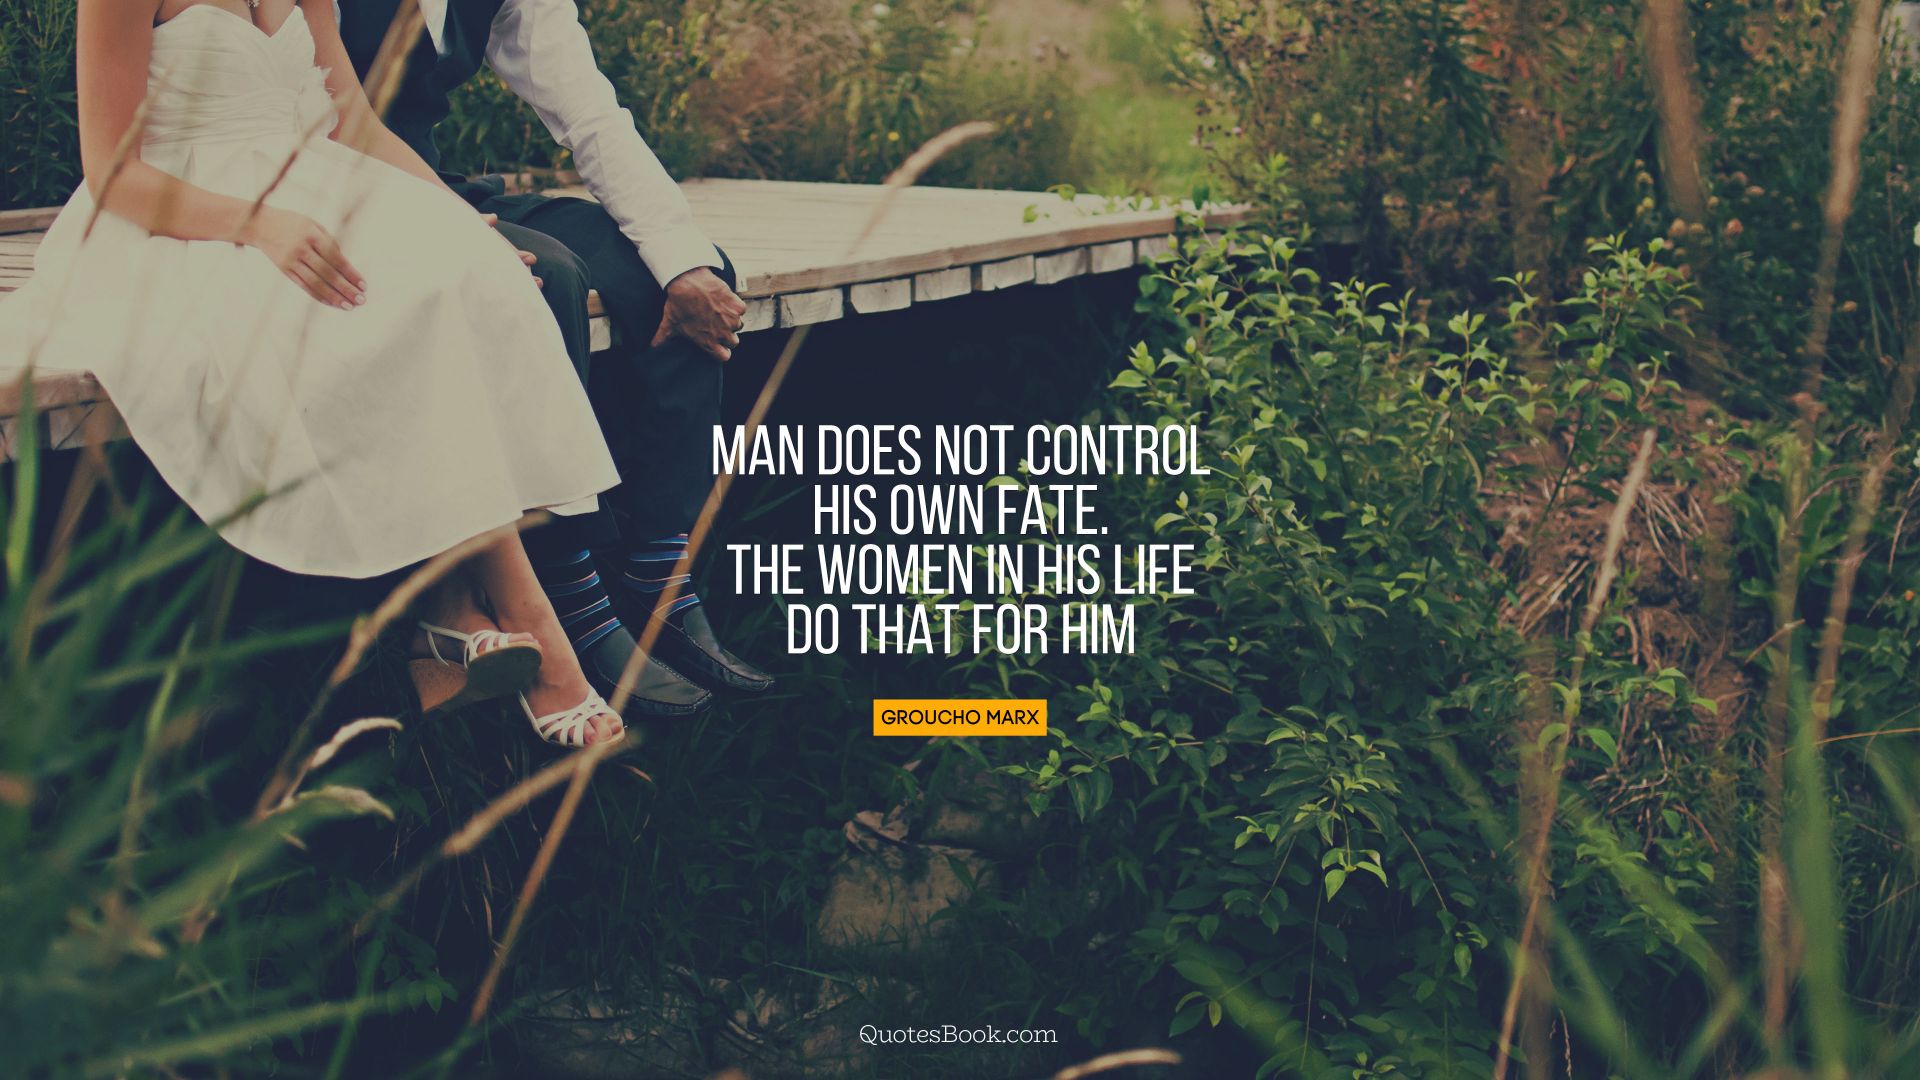 Man does not control his own fate. The women in his life do that for him. - Quote by Groucho Marx